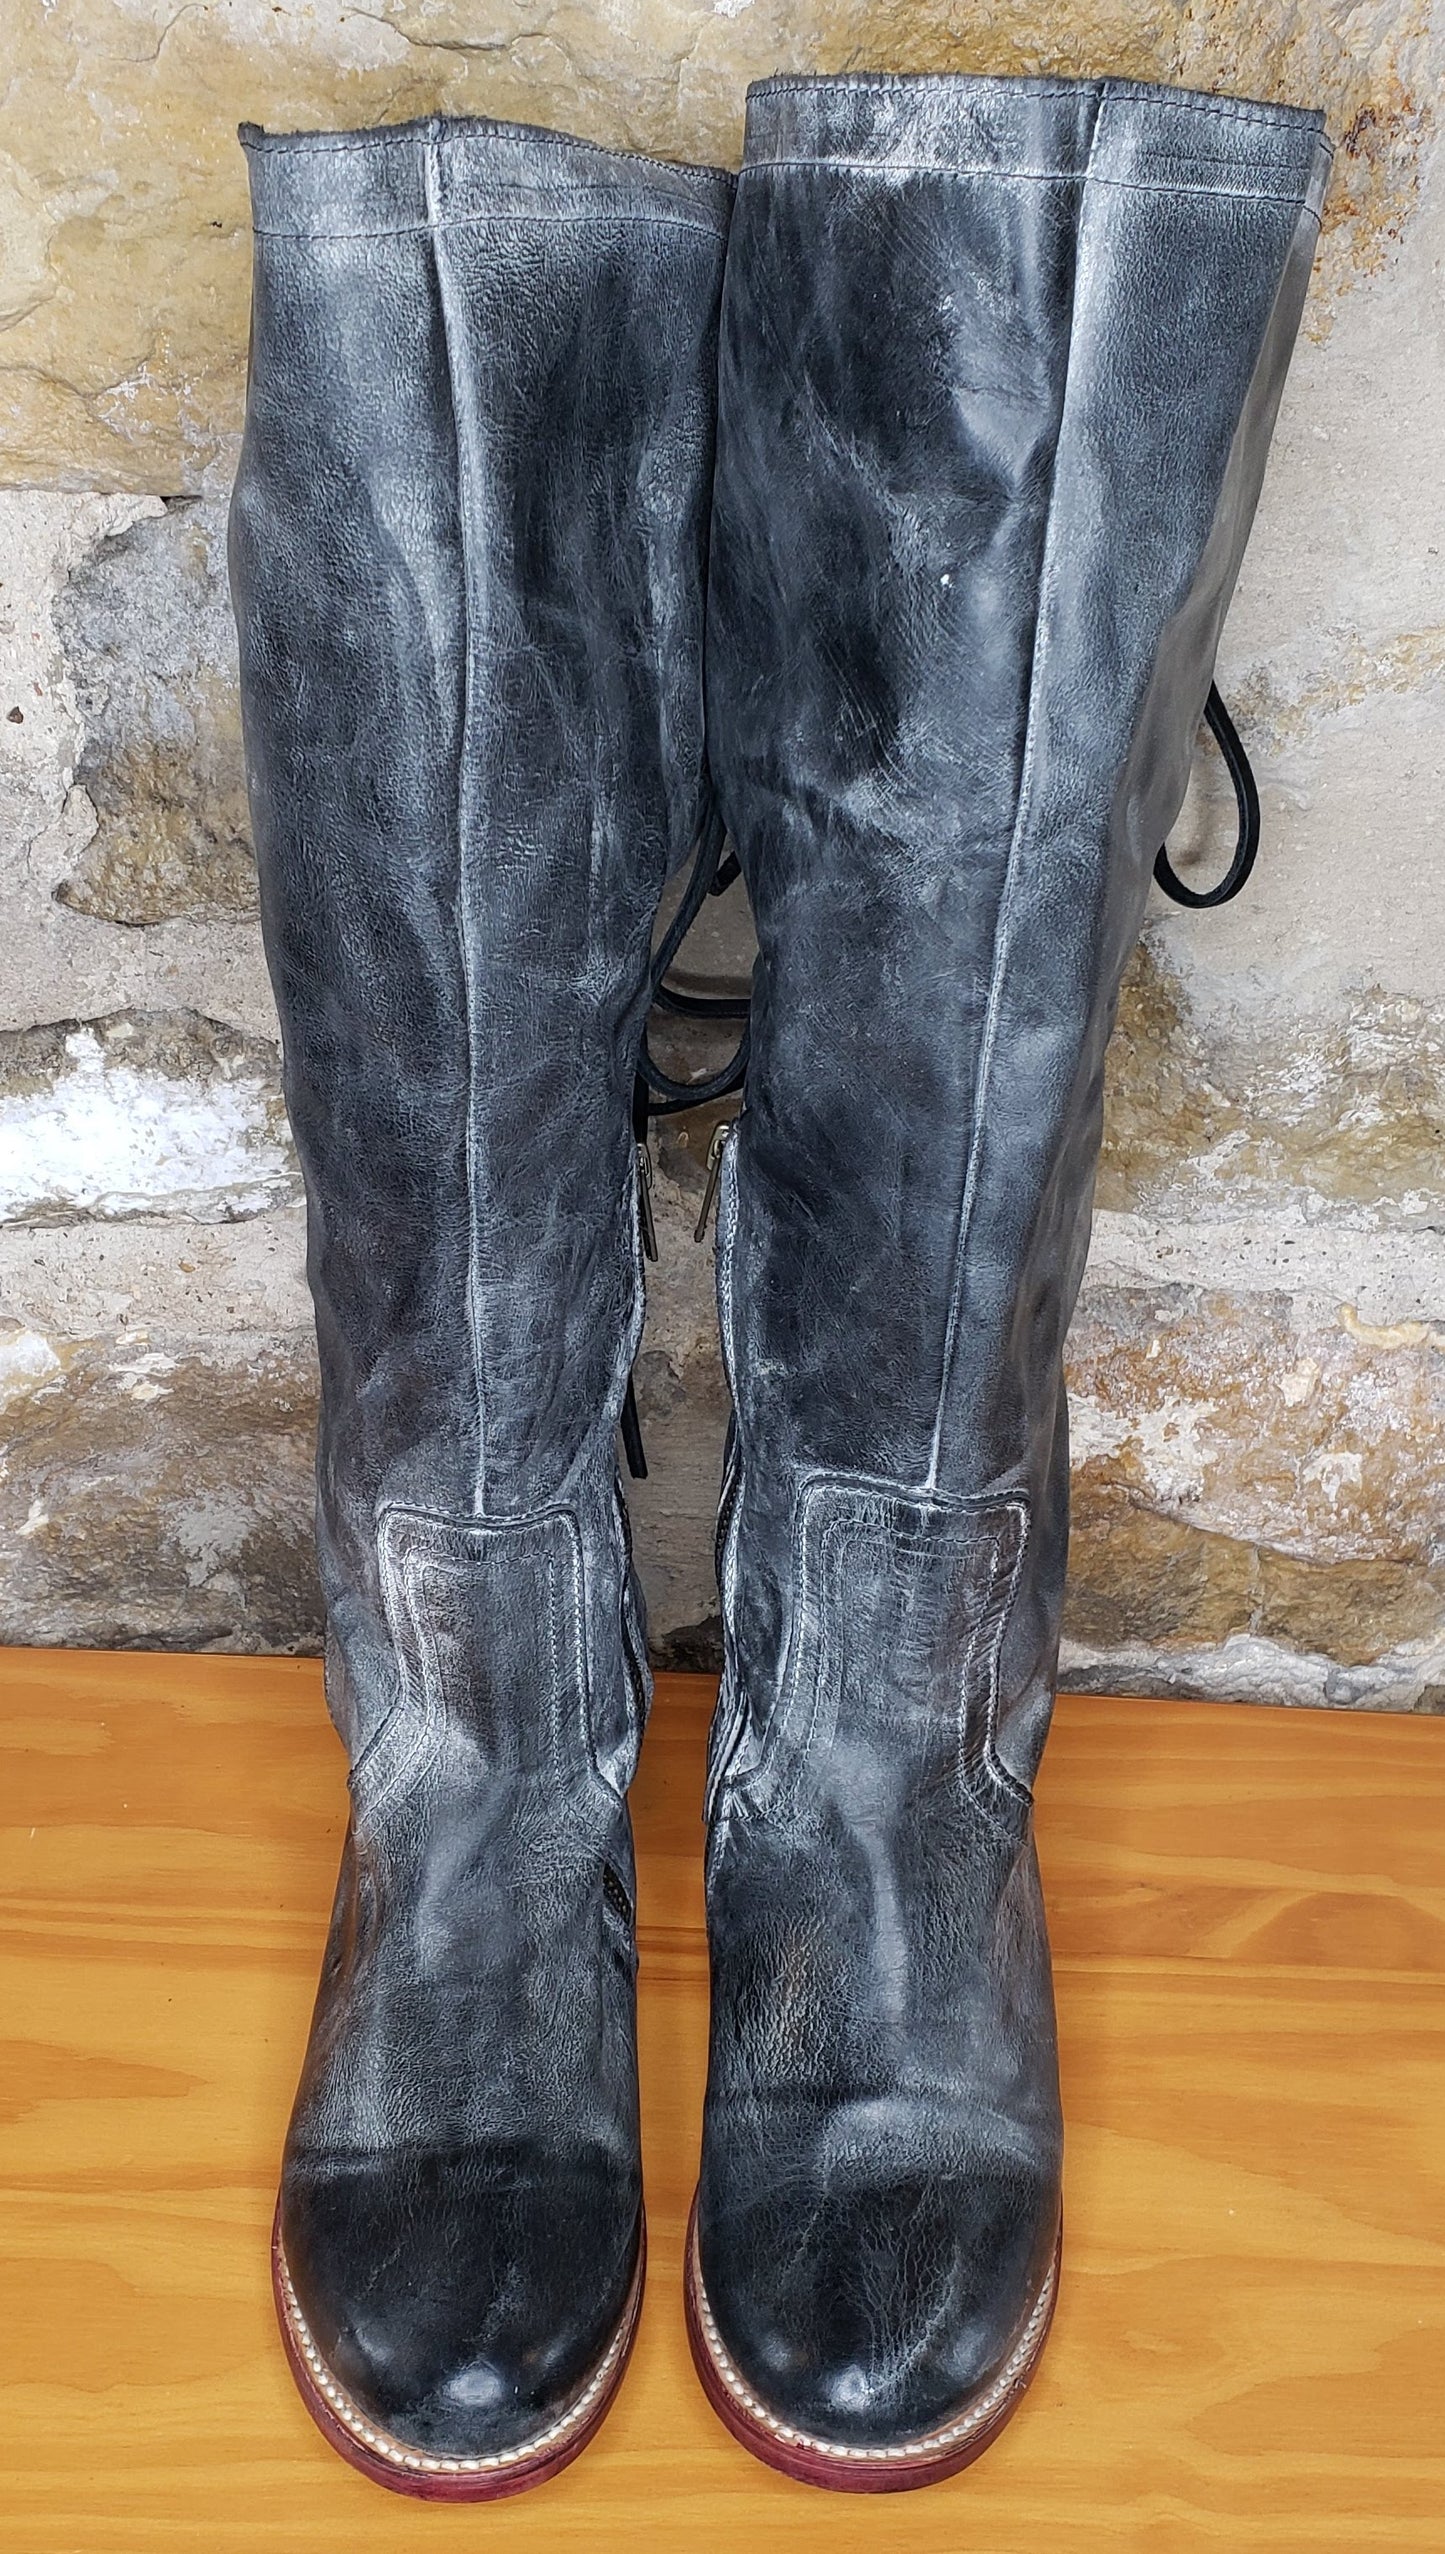 Freebird by Steven Black Distressed Leather Riding Boots Sz 8